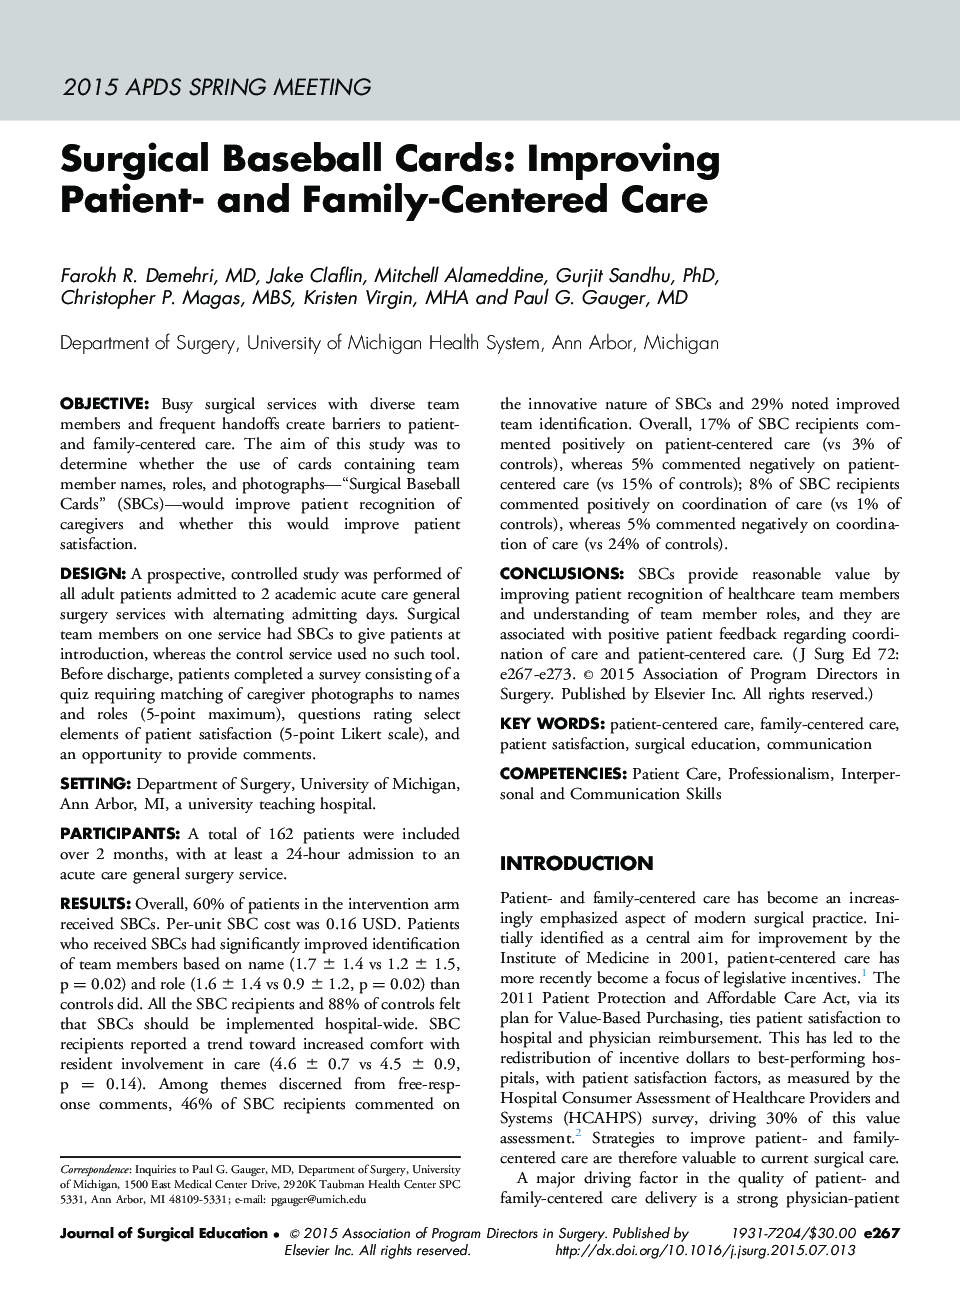 Surgical Baseball Cards: Improving Patient- and Family-Centered Care